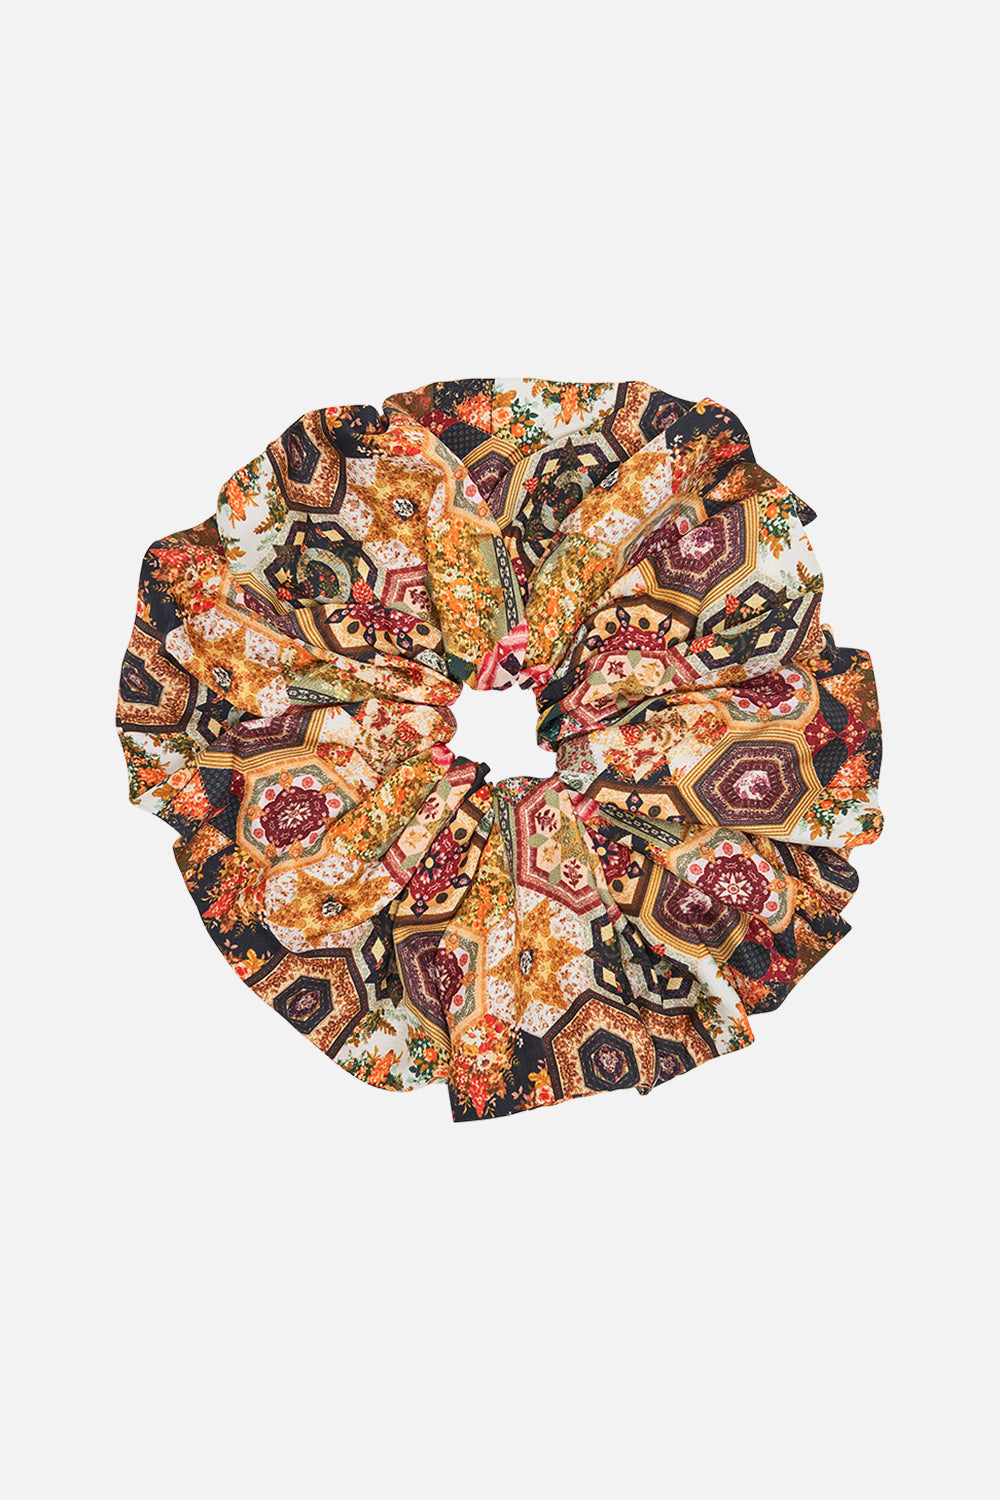 CAMILLA floral oversized scrunchie in Stitched in Time